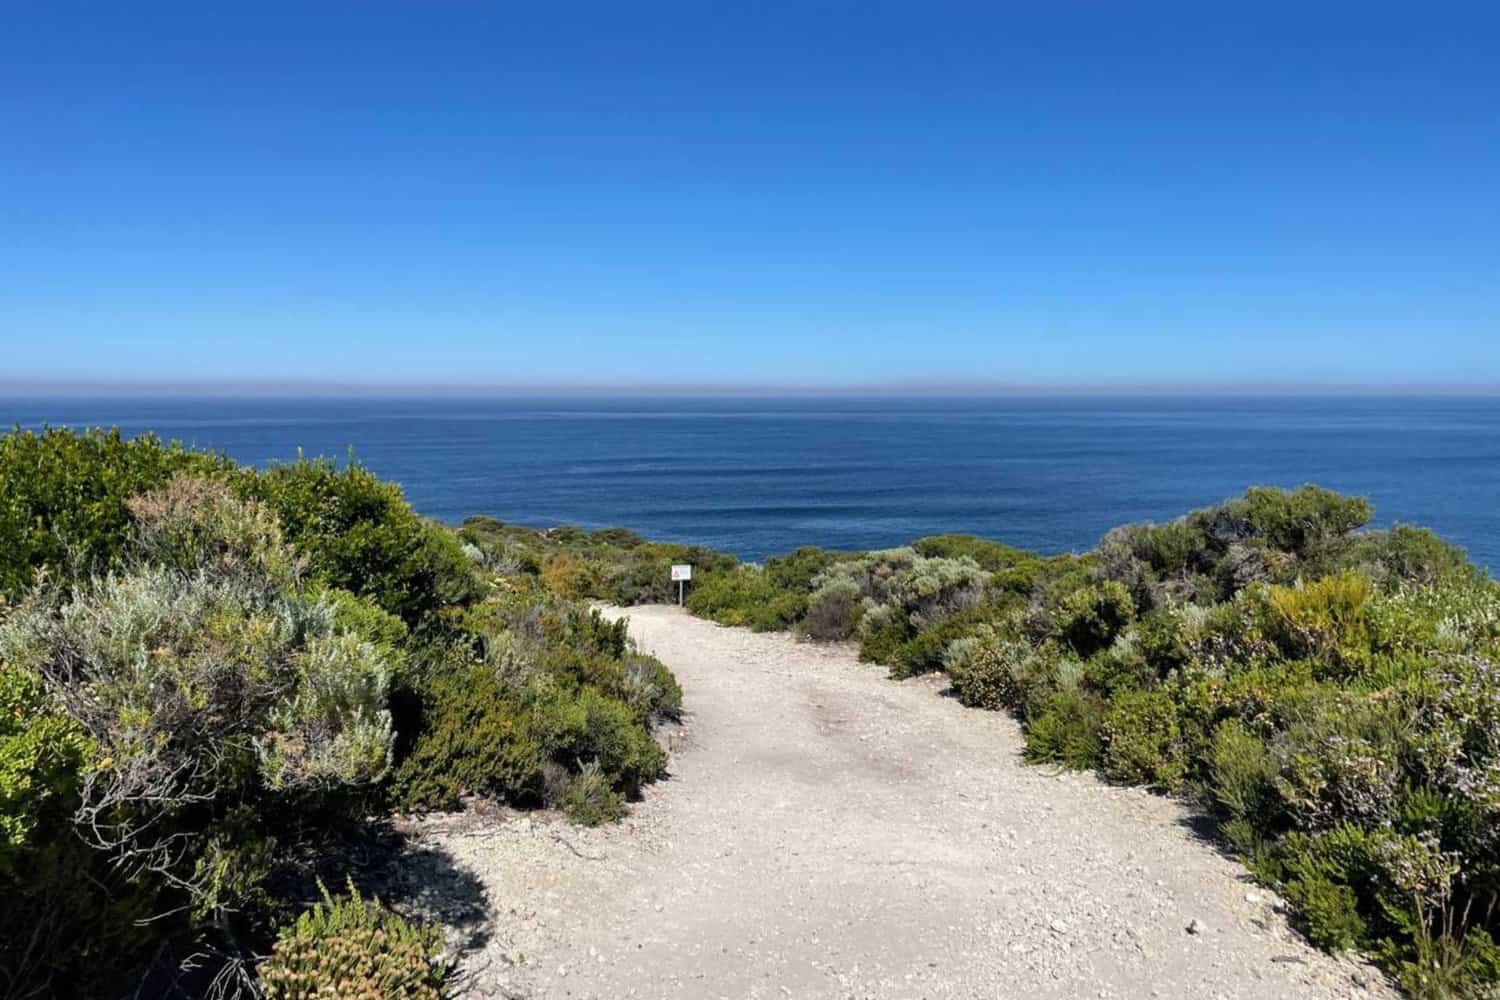 A tranquil sandy trail leading through coastal scrub with a serene view of the Indian Ocean on the horizon, near the Wilyabrup Sea Cliffs.